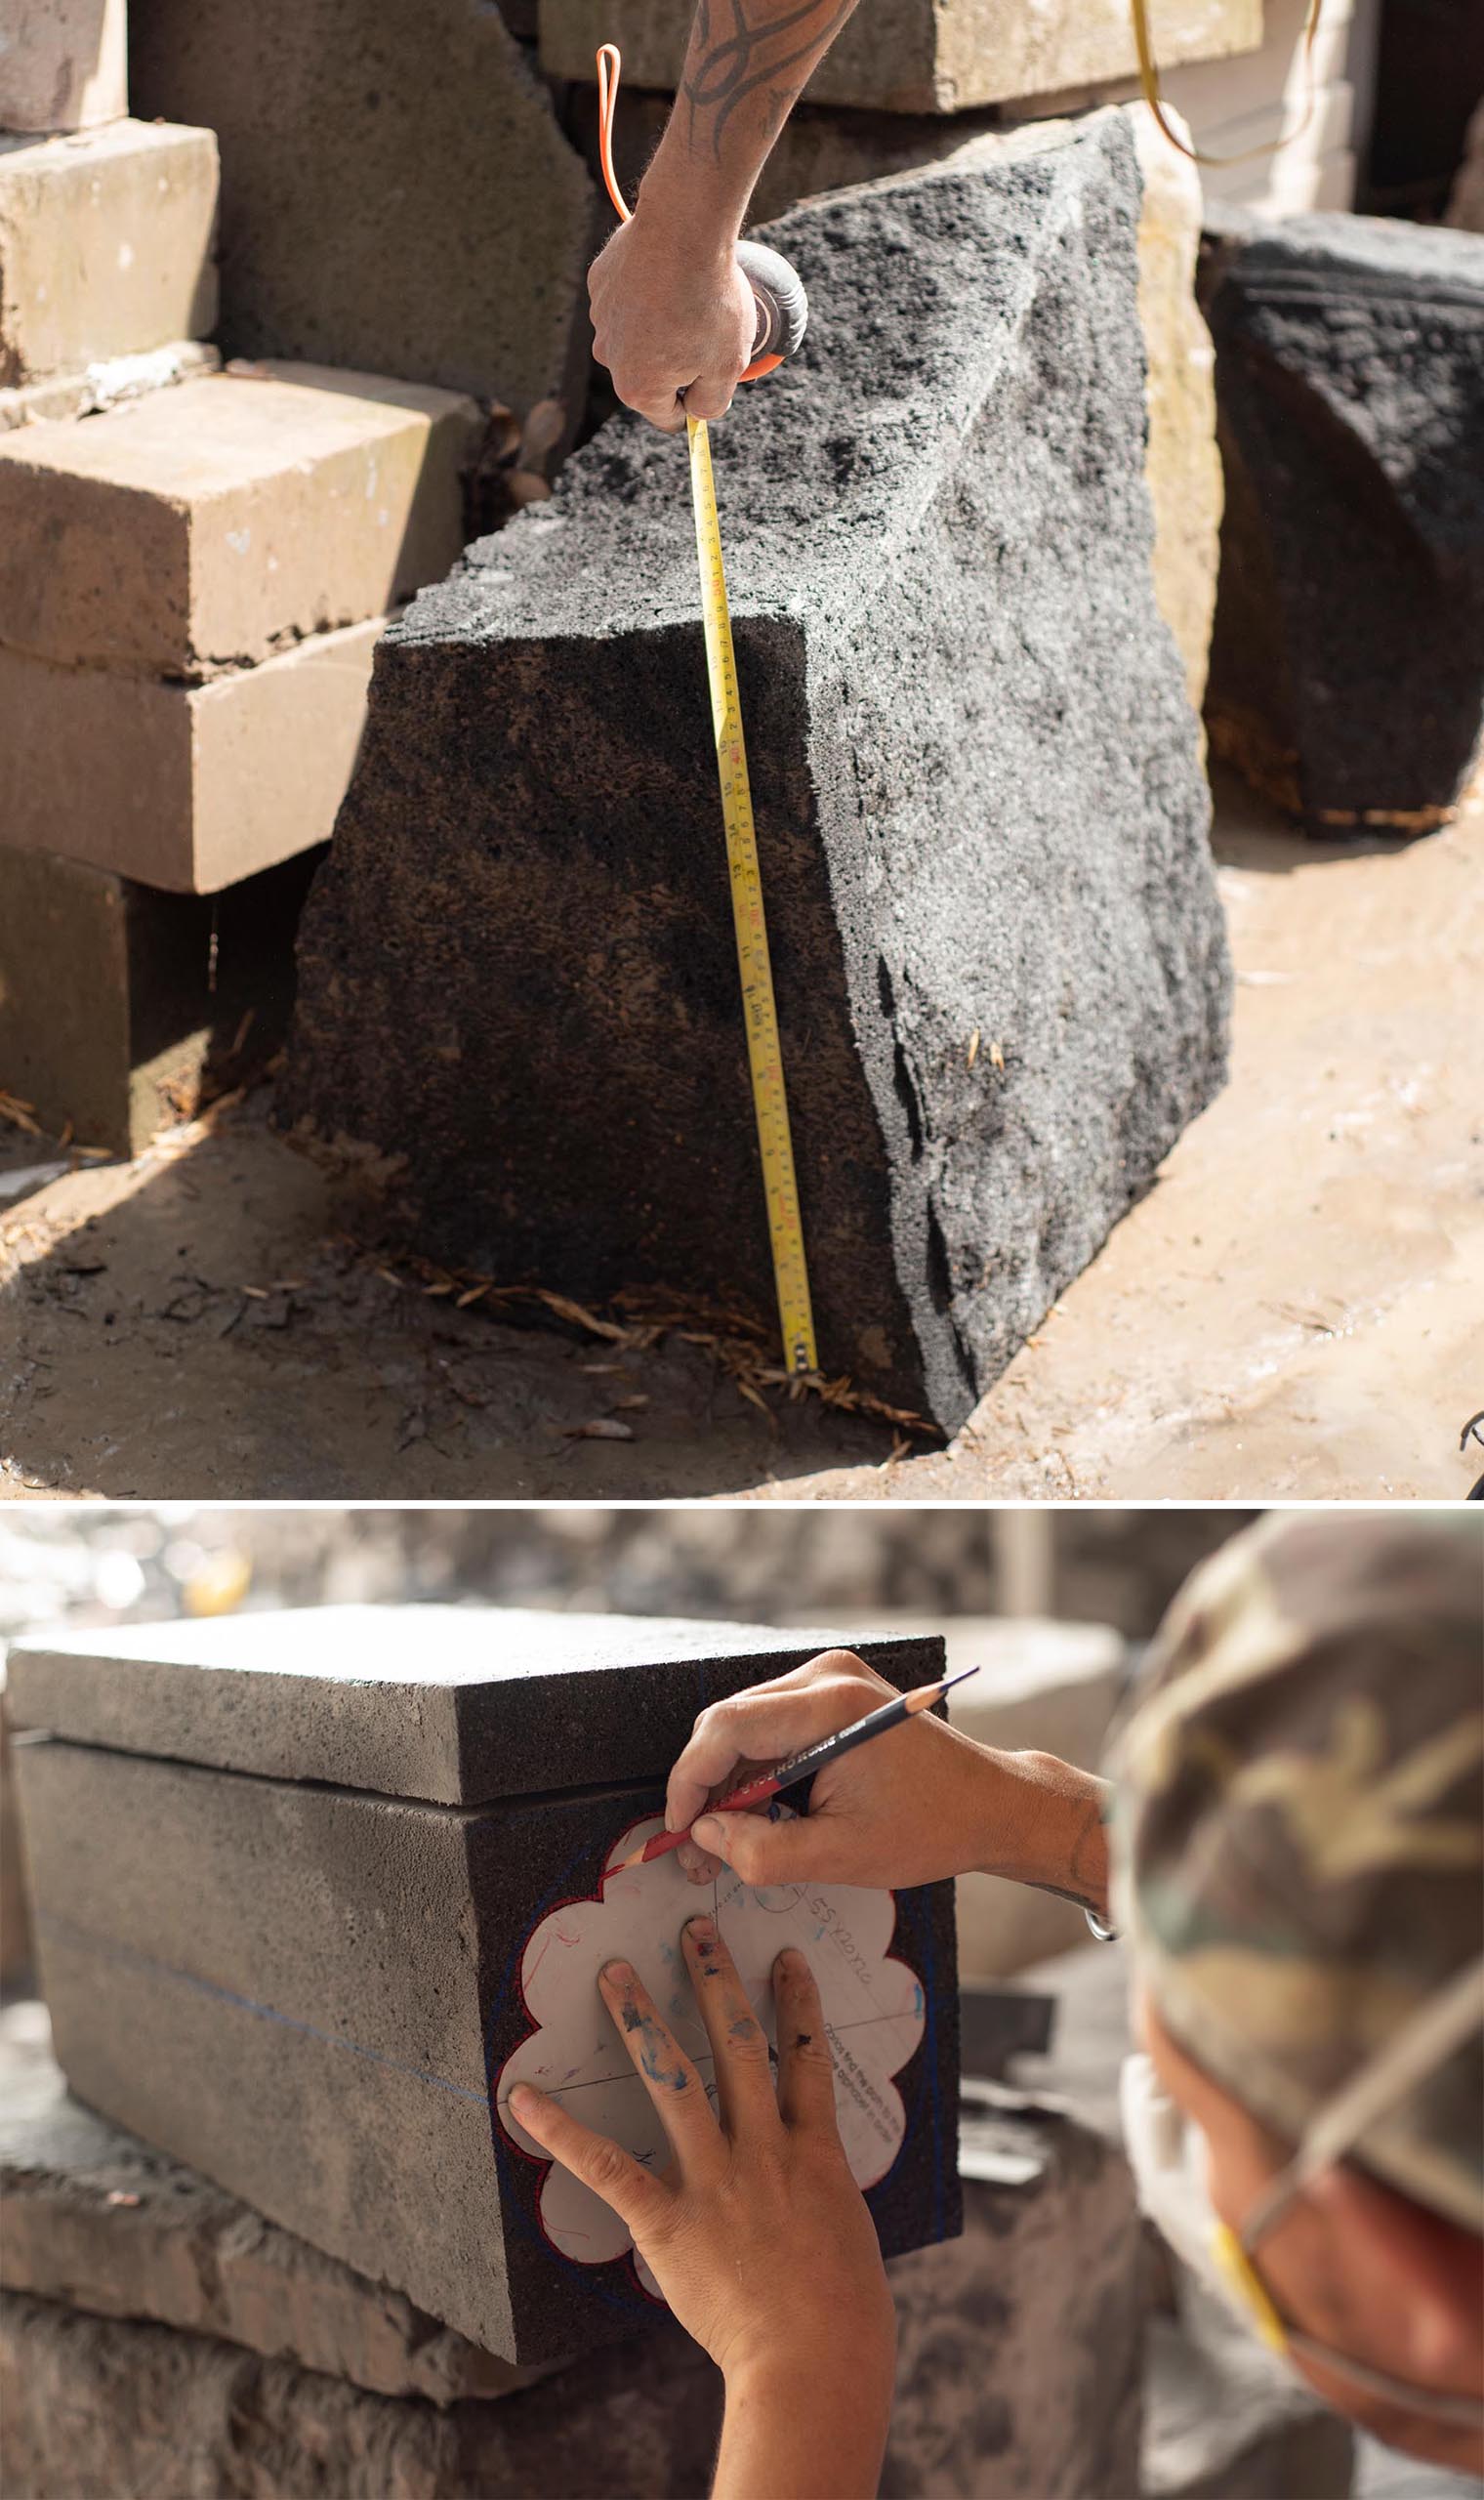 The making of a side table from volcanic rock.